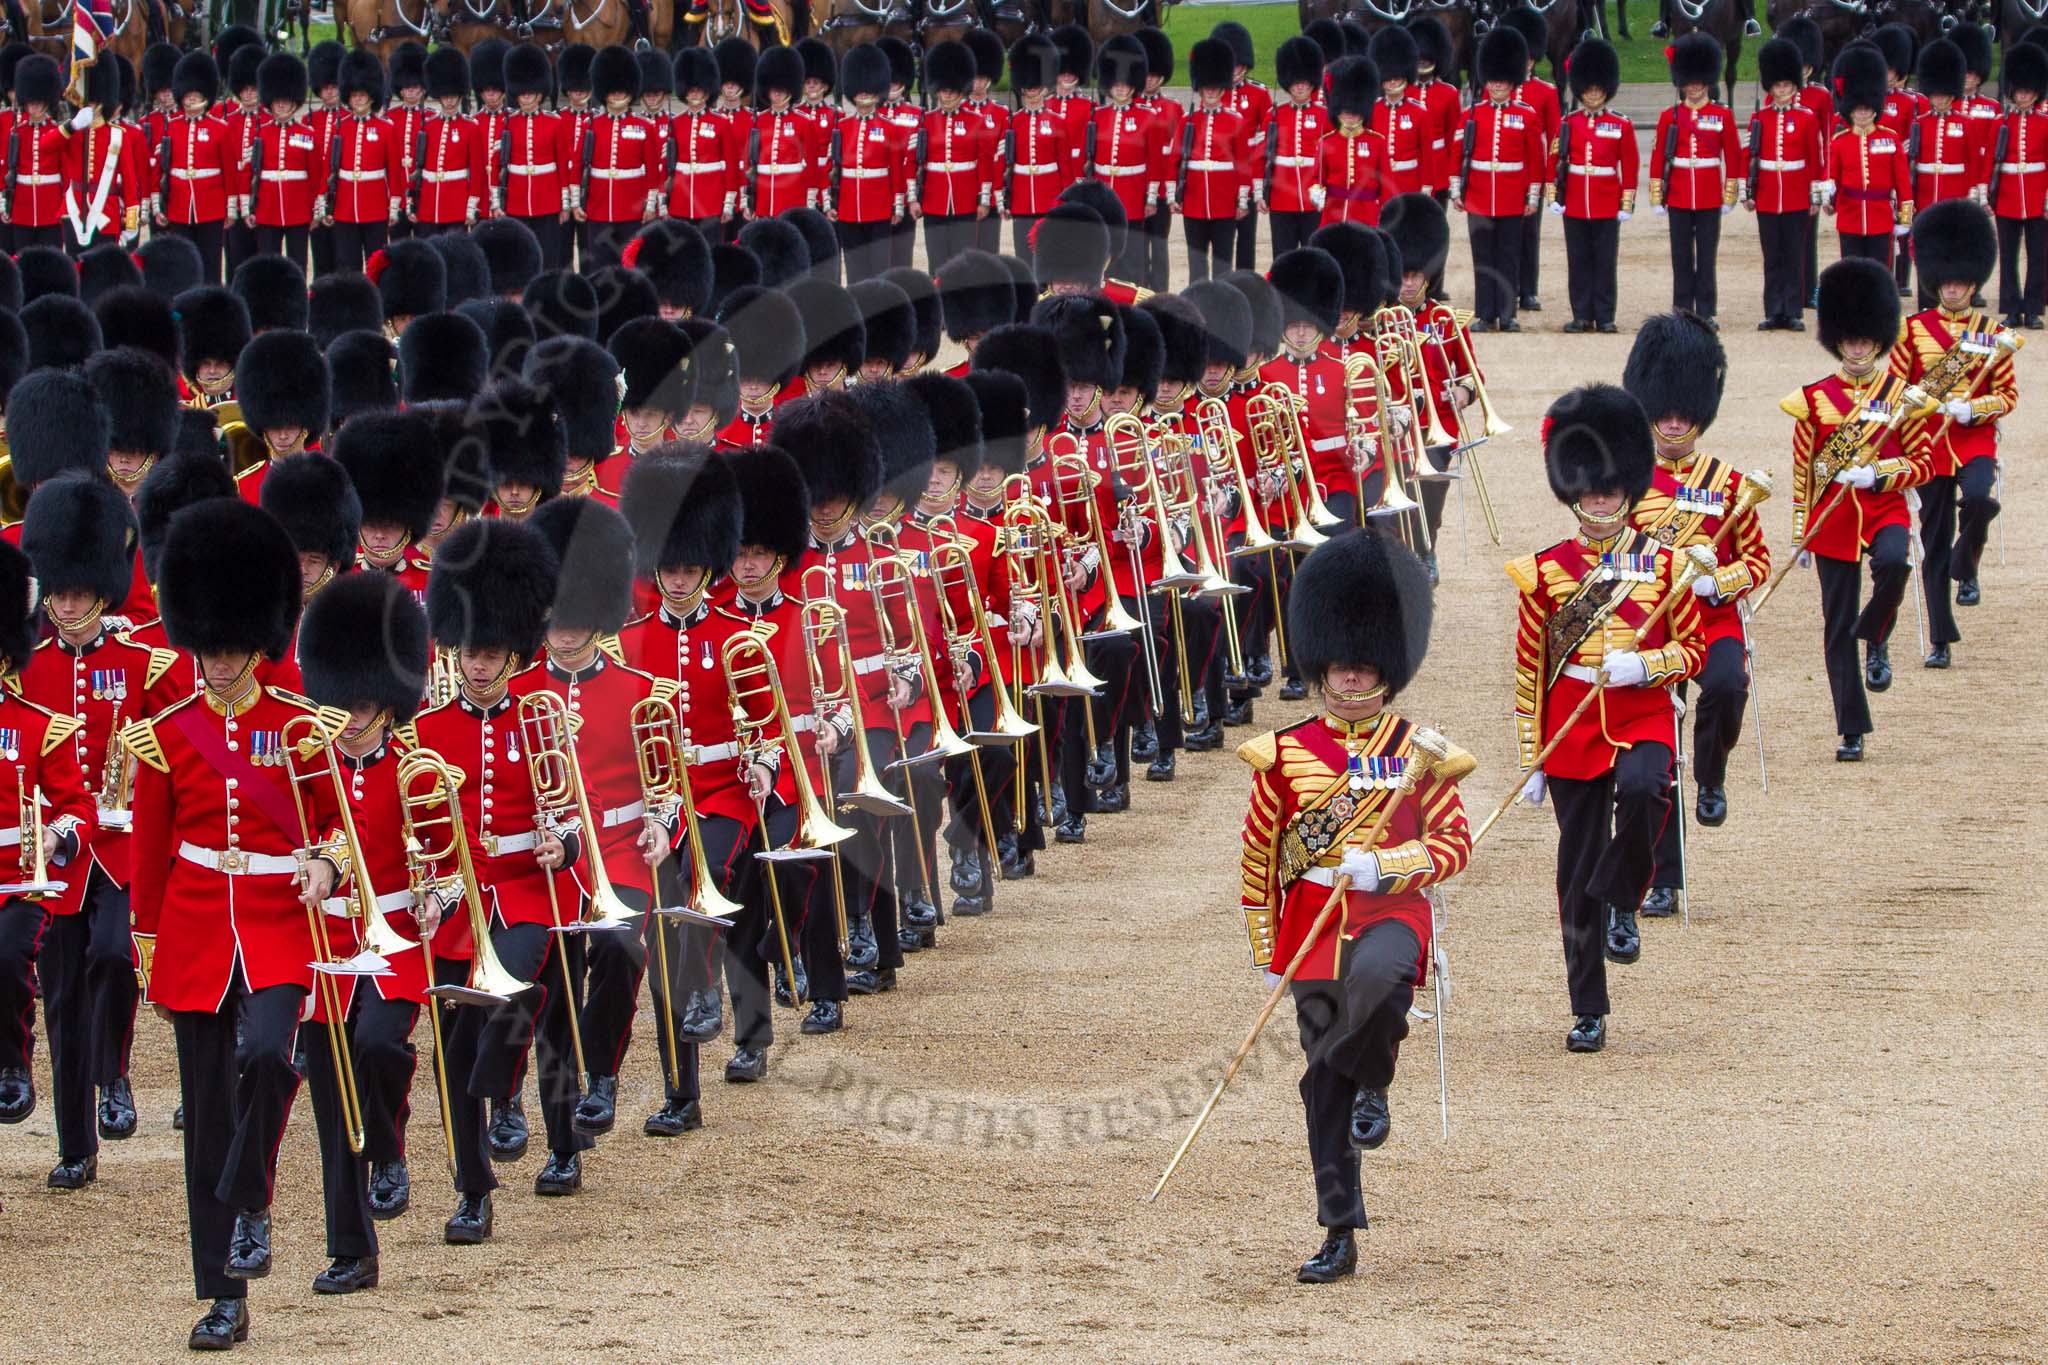 The Colonel's Review 2012: Massed Bands and the five Drum Majors..
Horse Guards Parade, Westminster,
London SW1,

United Kingdom,
on 09 June 2012 at 11:49, image #376